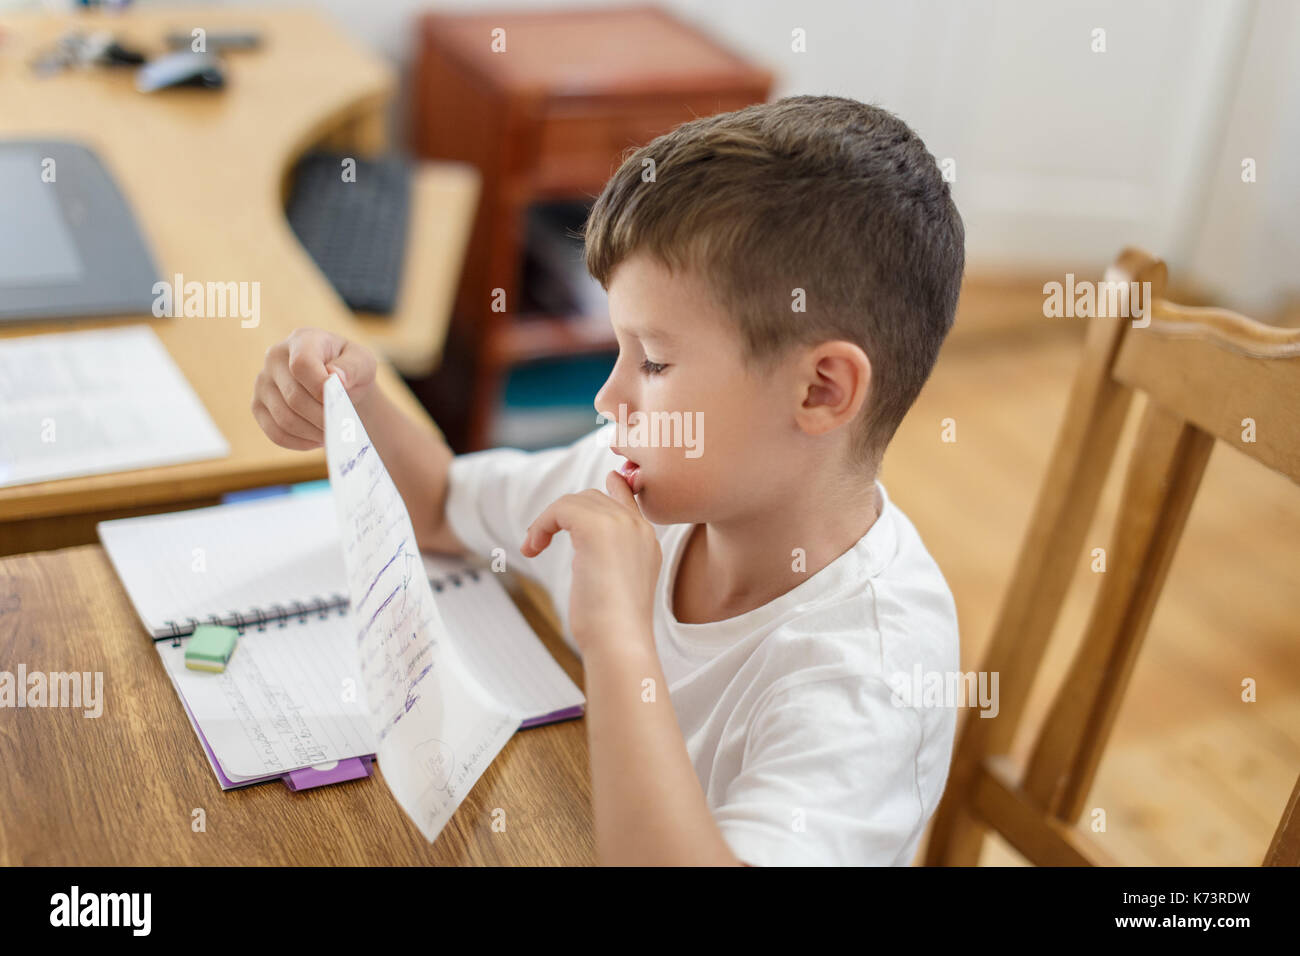 Little schoolboy checking his homework mistakes, thinking Stock Photo